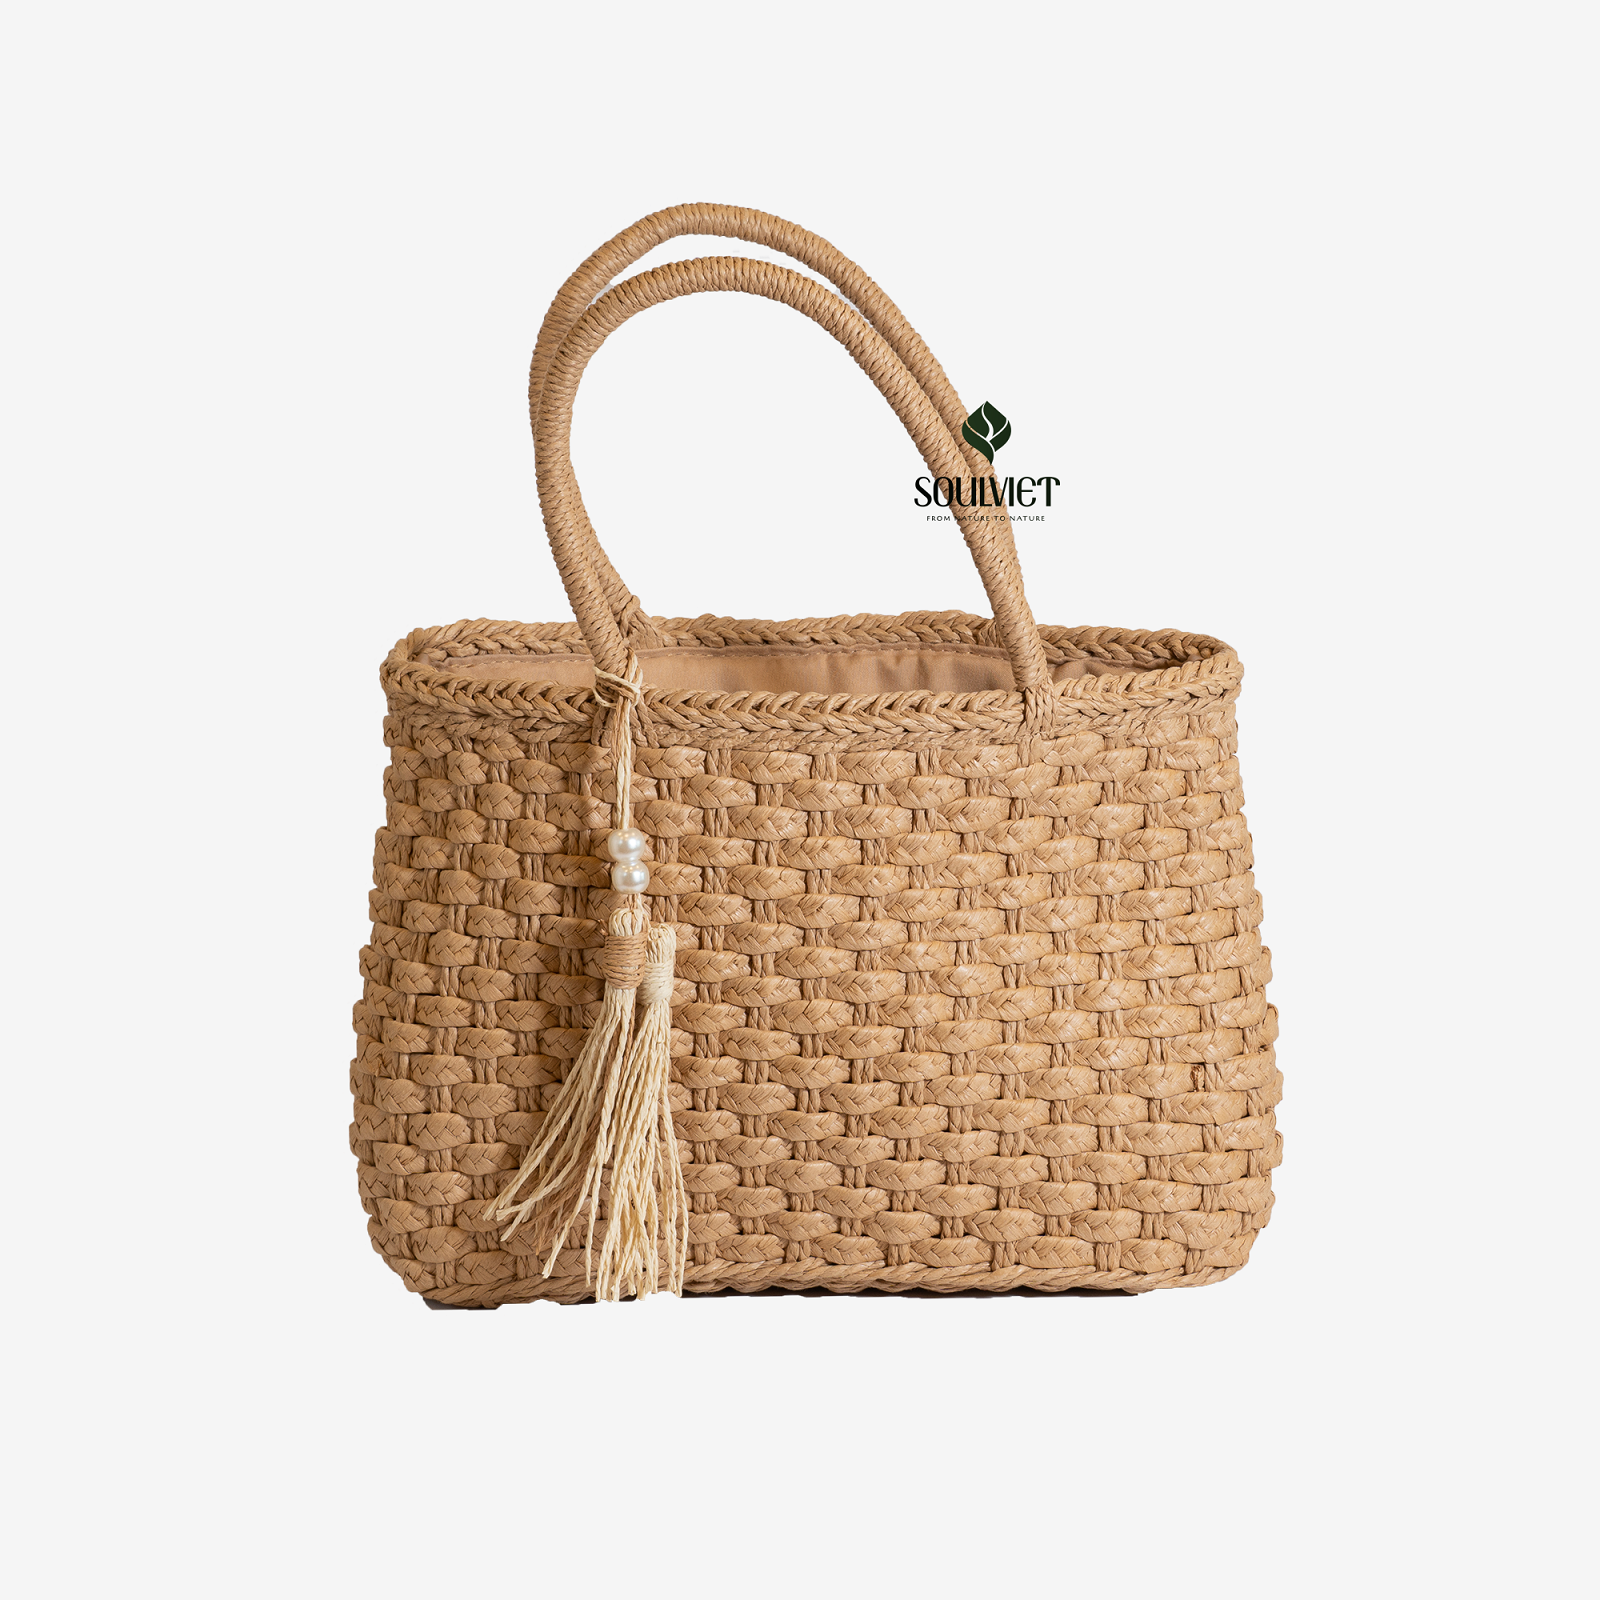 Woven Fabric Tape Handbag with Paper Fiber Border and Handle, small hanging accessory